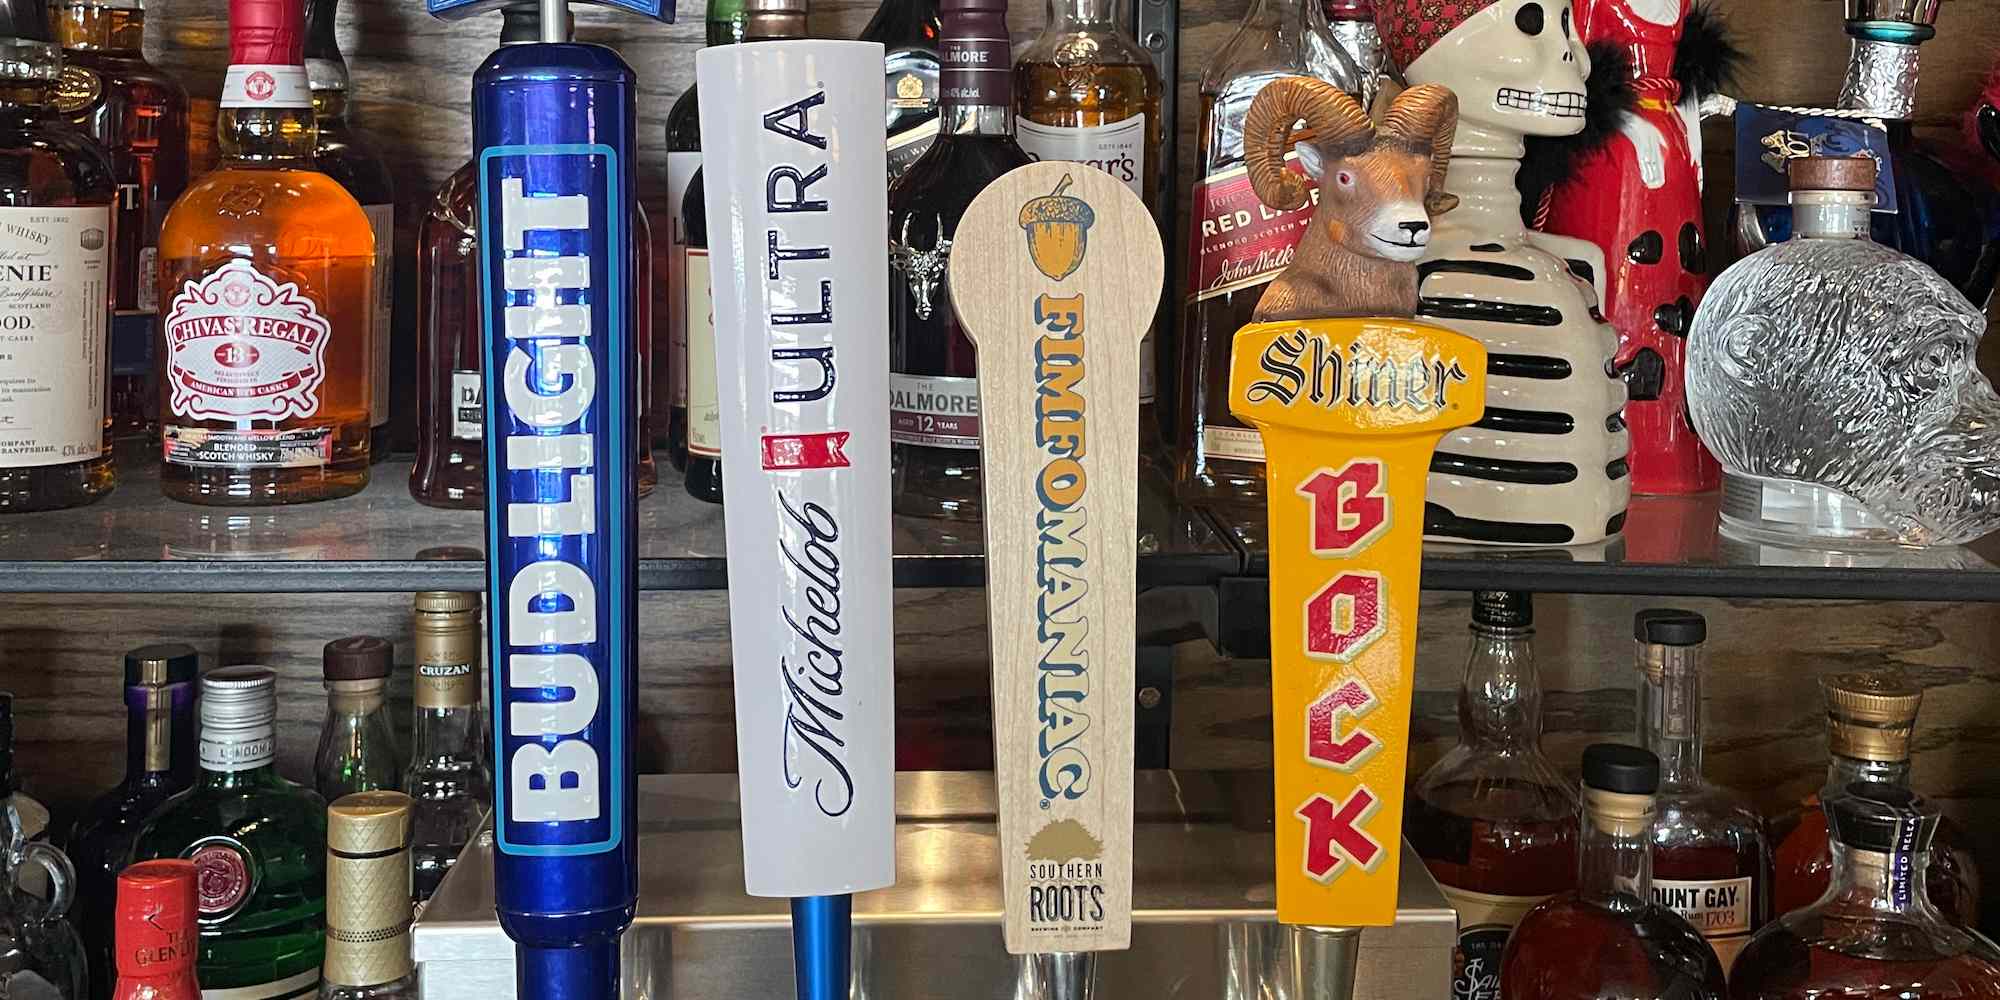 Draft beer tap handles at Squirrely's Tavern, including Fimfomaniac beer.